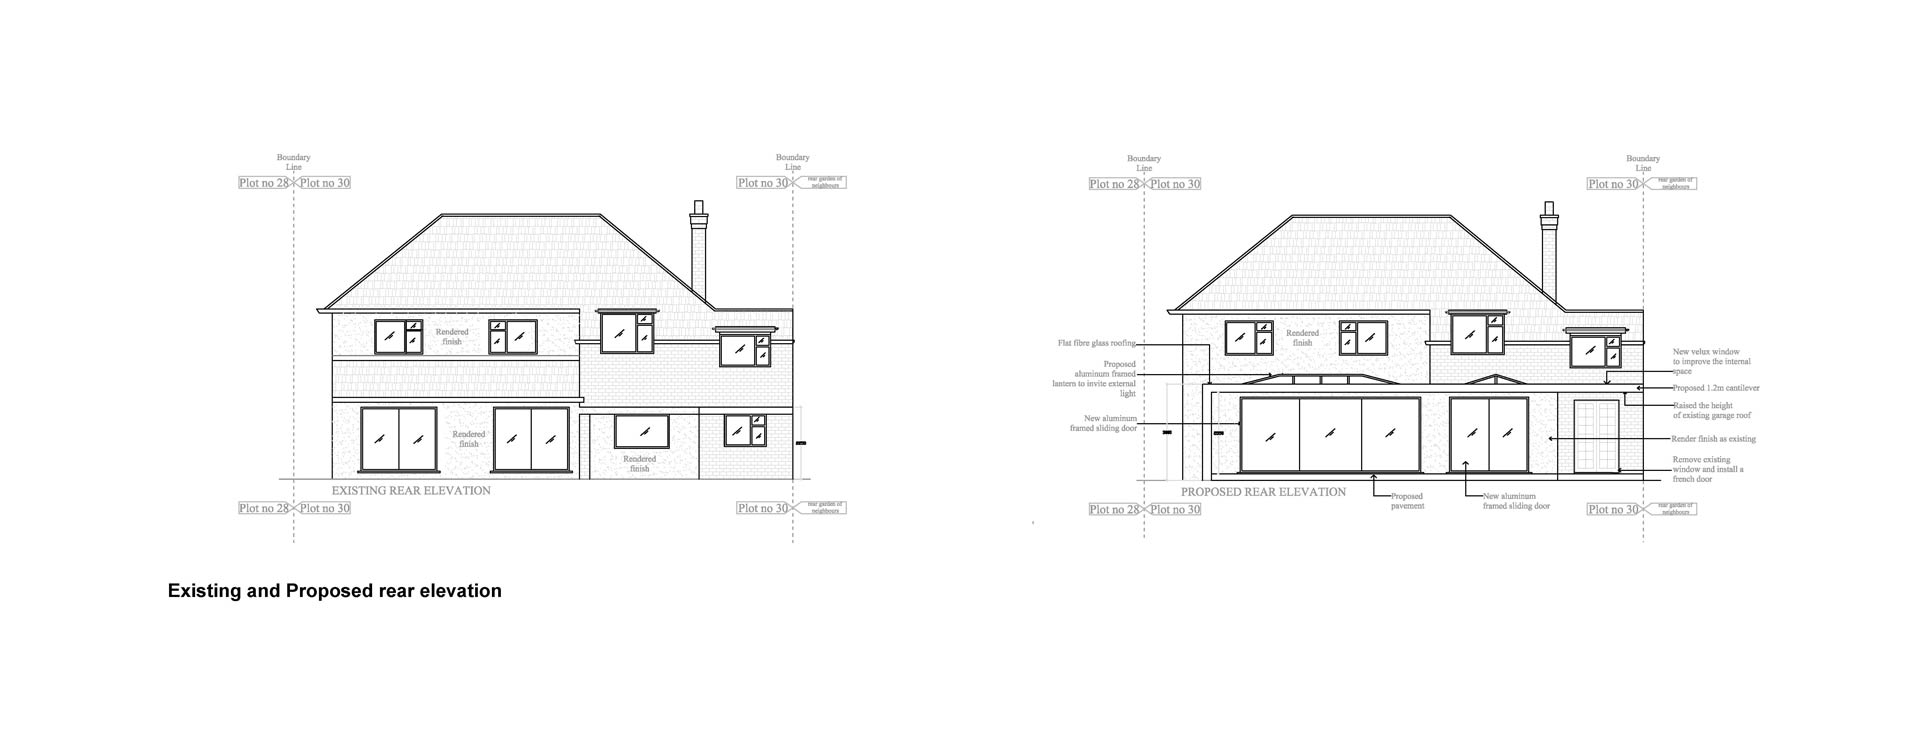 Surrey-council-Existing-and-Proposed-Rear-Elevation